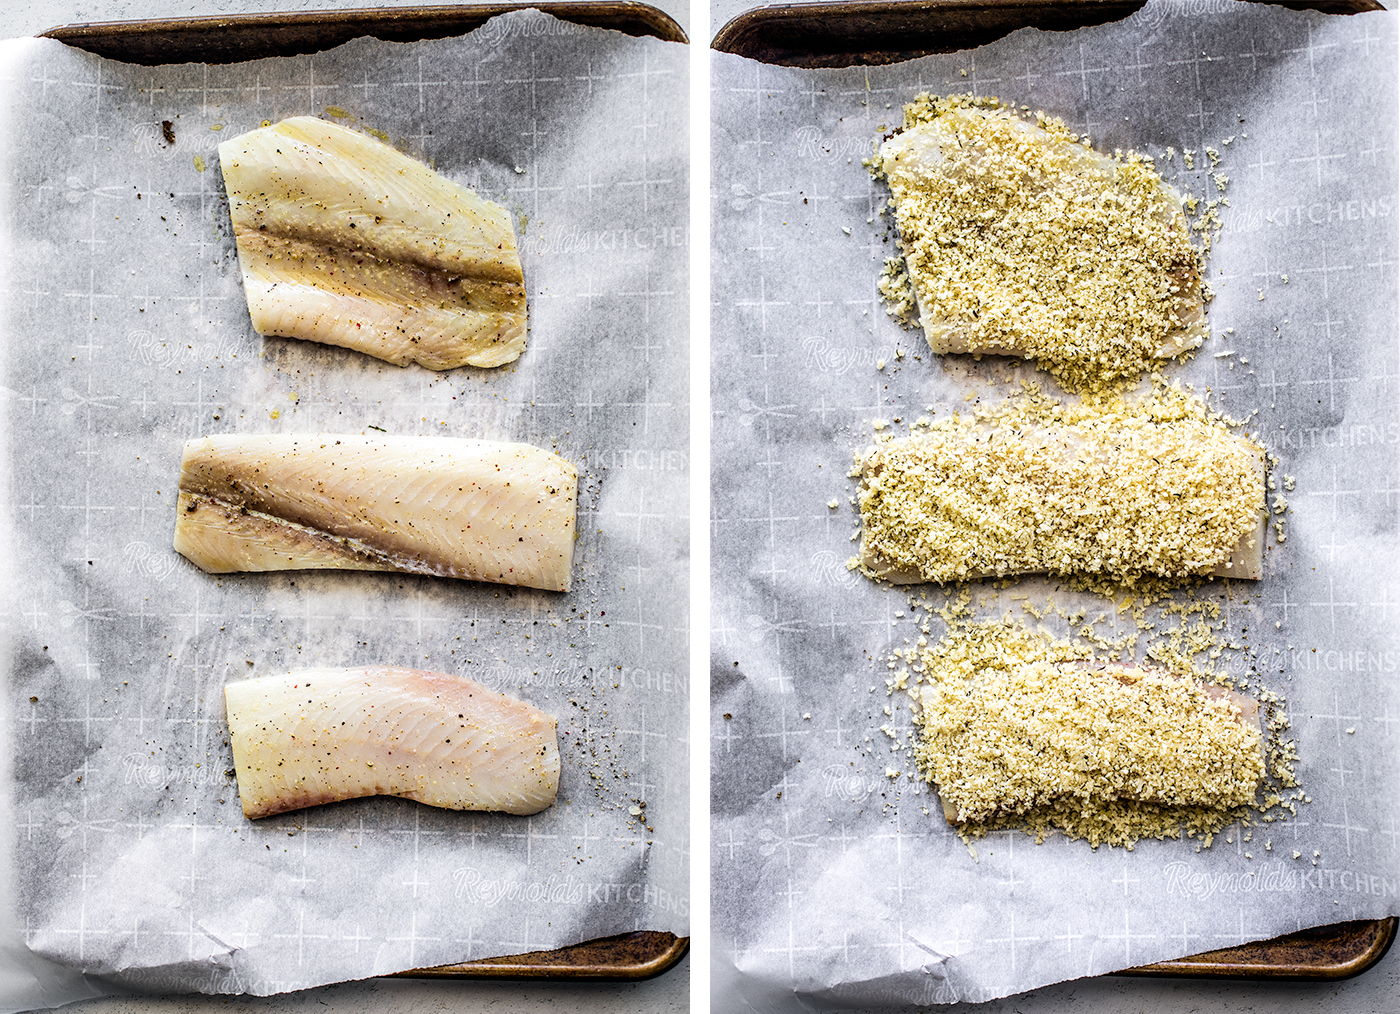 Two overhead shots of flounder fillets on baking sheet; one shot unbreaded, the other breaded.